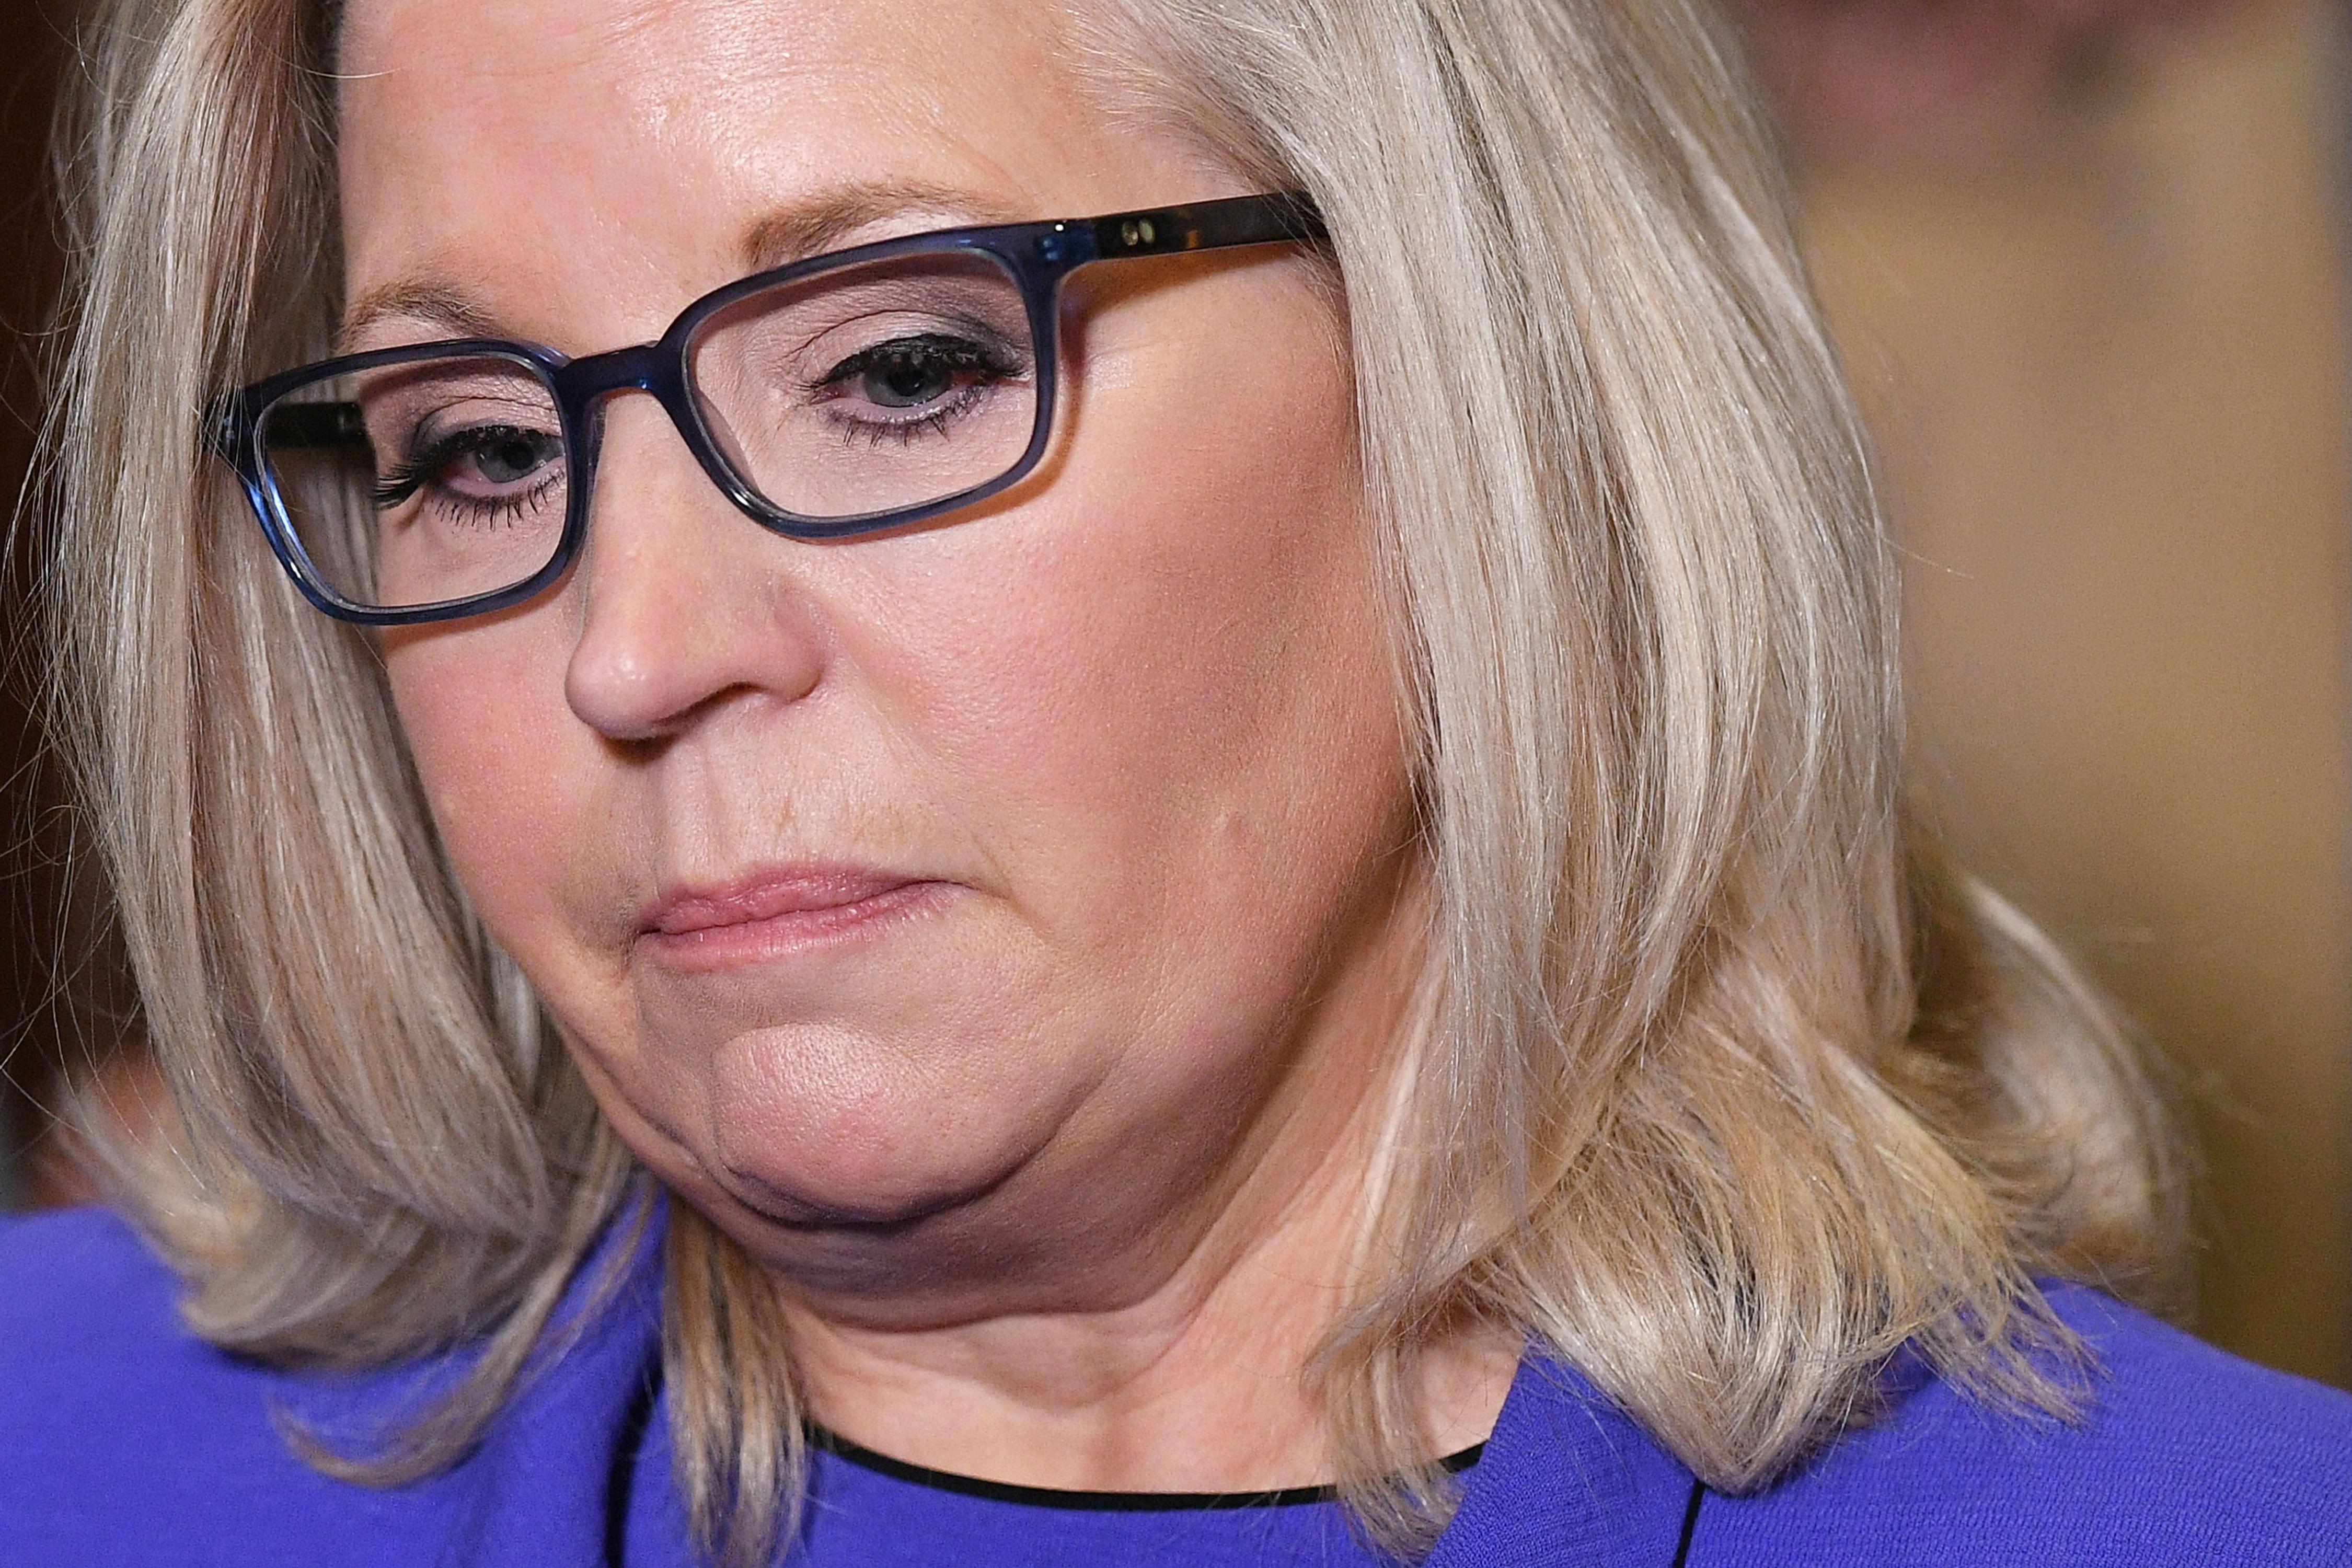 Rep. Liz Cheney, Republican of Wyoming, speaks to the press at the Capitol in Washington, D.C. on May 12, 2021. 